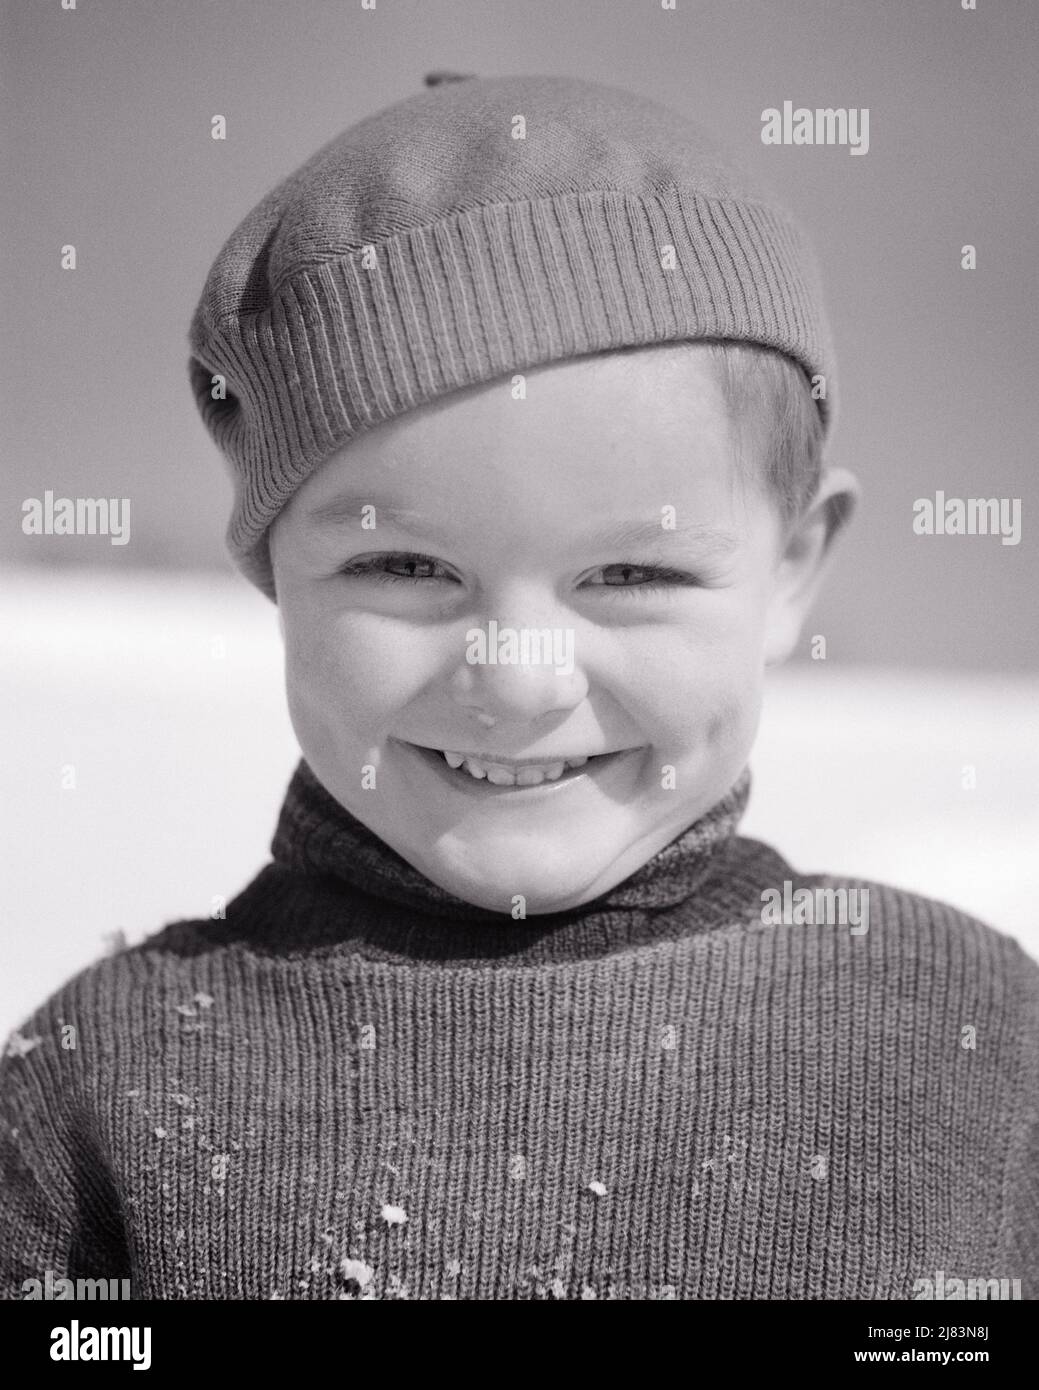 1930s PORTRAIT SMILING LITTLE BOY WEARING KNIT CAP AND TURTLENECK SWEATER DUSTED WITH SNOW FLAKES SQUINTING LOOKING AT CAMERA - j6749 HAR001 HARS HEALTHINESS HOME LIFE COPY SPACE MALES CONFIDENCE EXPRESSIONS B&W KNIT WINTERTIME EYE CONTACT HAPPINESS PERSONALITY HEAD AND SHOULDERS CHEERFUL AND EXCITEMENT KNOWLEDGE SQUINTING HANDSOME PRIDE DIMPLES SMILES FRIENDLY JOYFUL STYLISH PLEASANT WINTERY AGREEABLE CHARMING DUSTED FLAKES GROWTH JUVENILES LOVABLE PERSONABLE PLEASING ADORABLE APPEALING BLACK AND WHITE CAUCASIAN ETHNICITY HAR001 OLD FASHIONED TURTLENECK Stock Photo